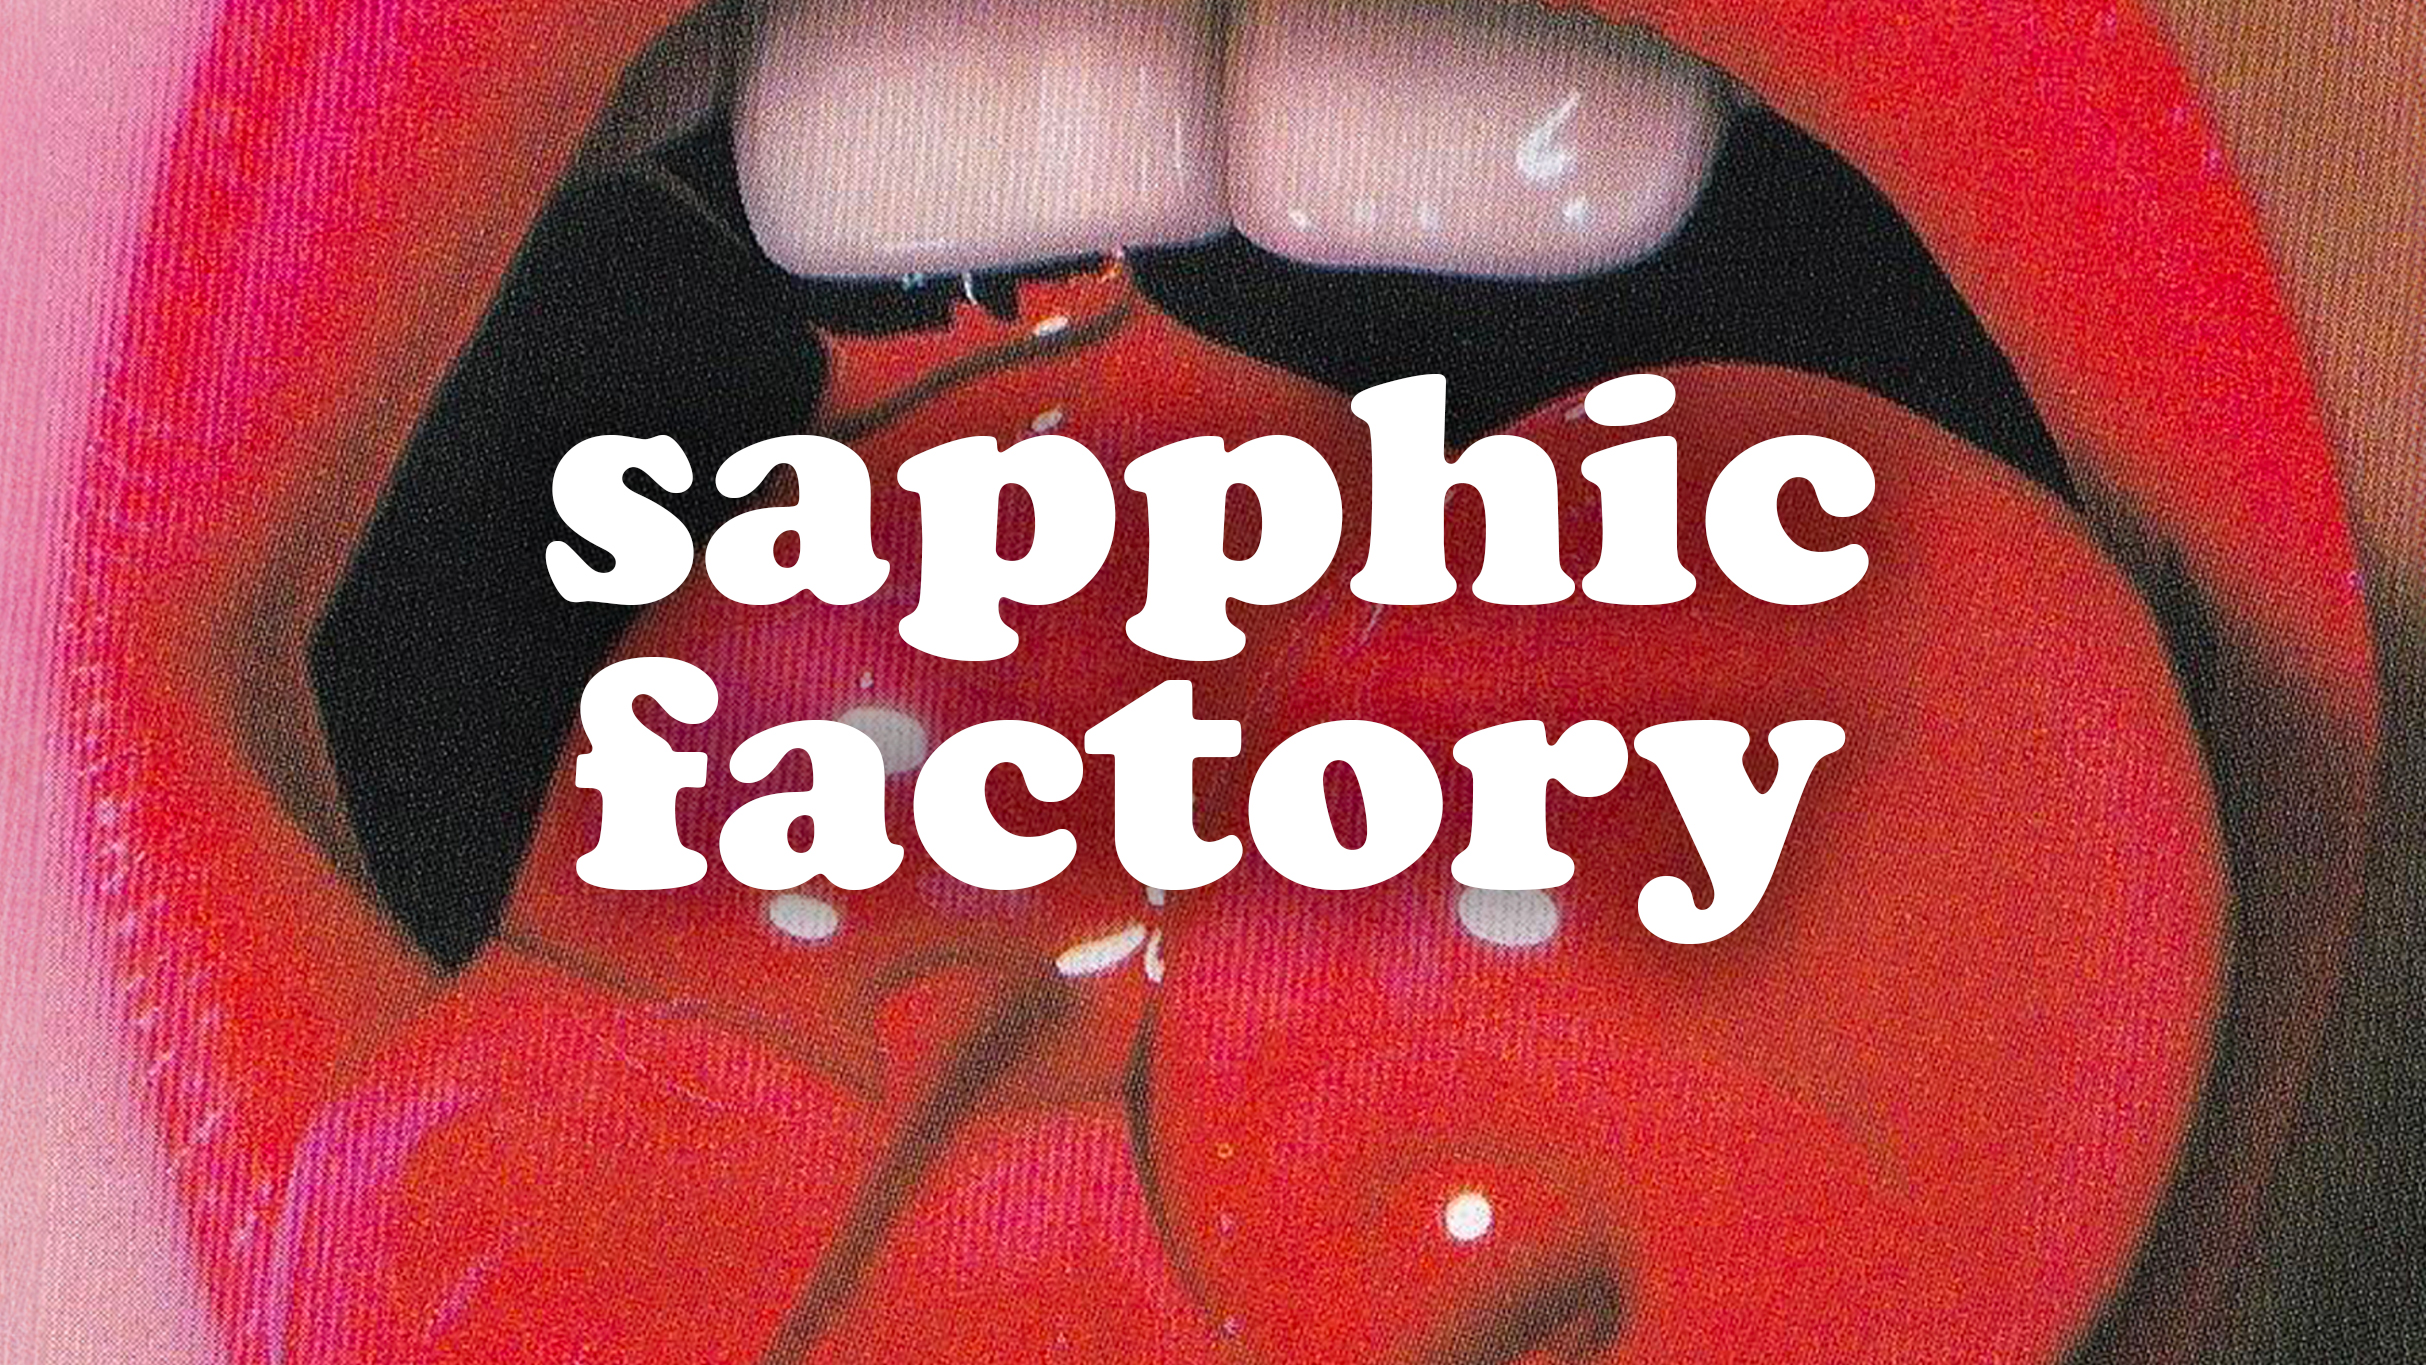 sapphic factory: queer joy party - 18+ Only